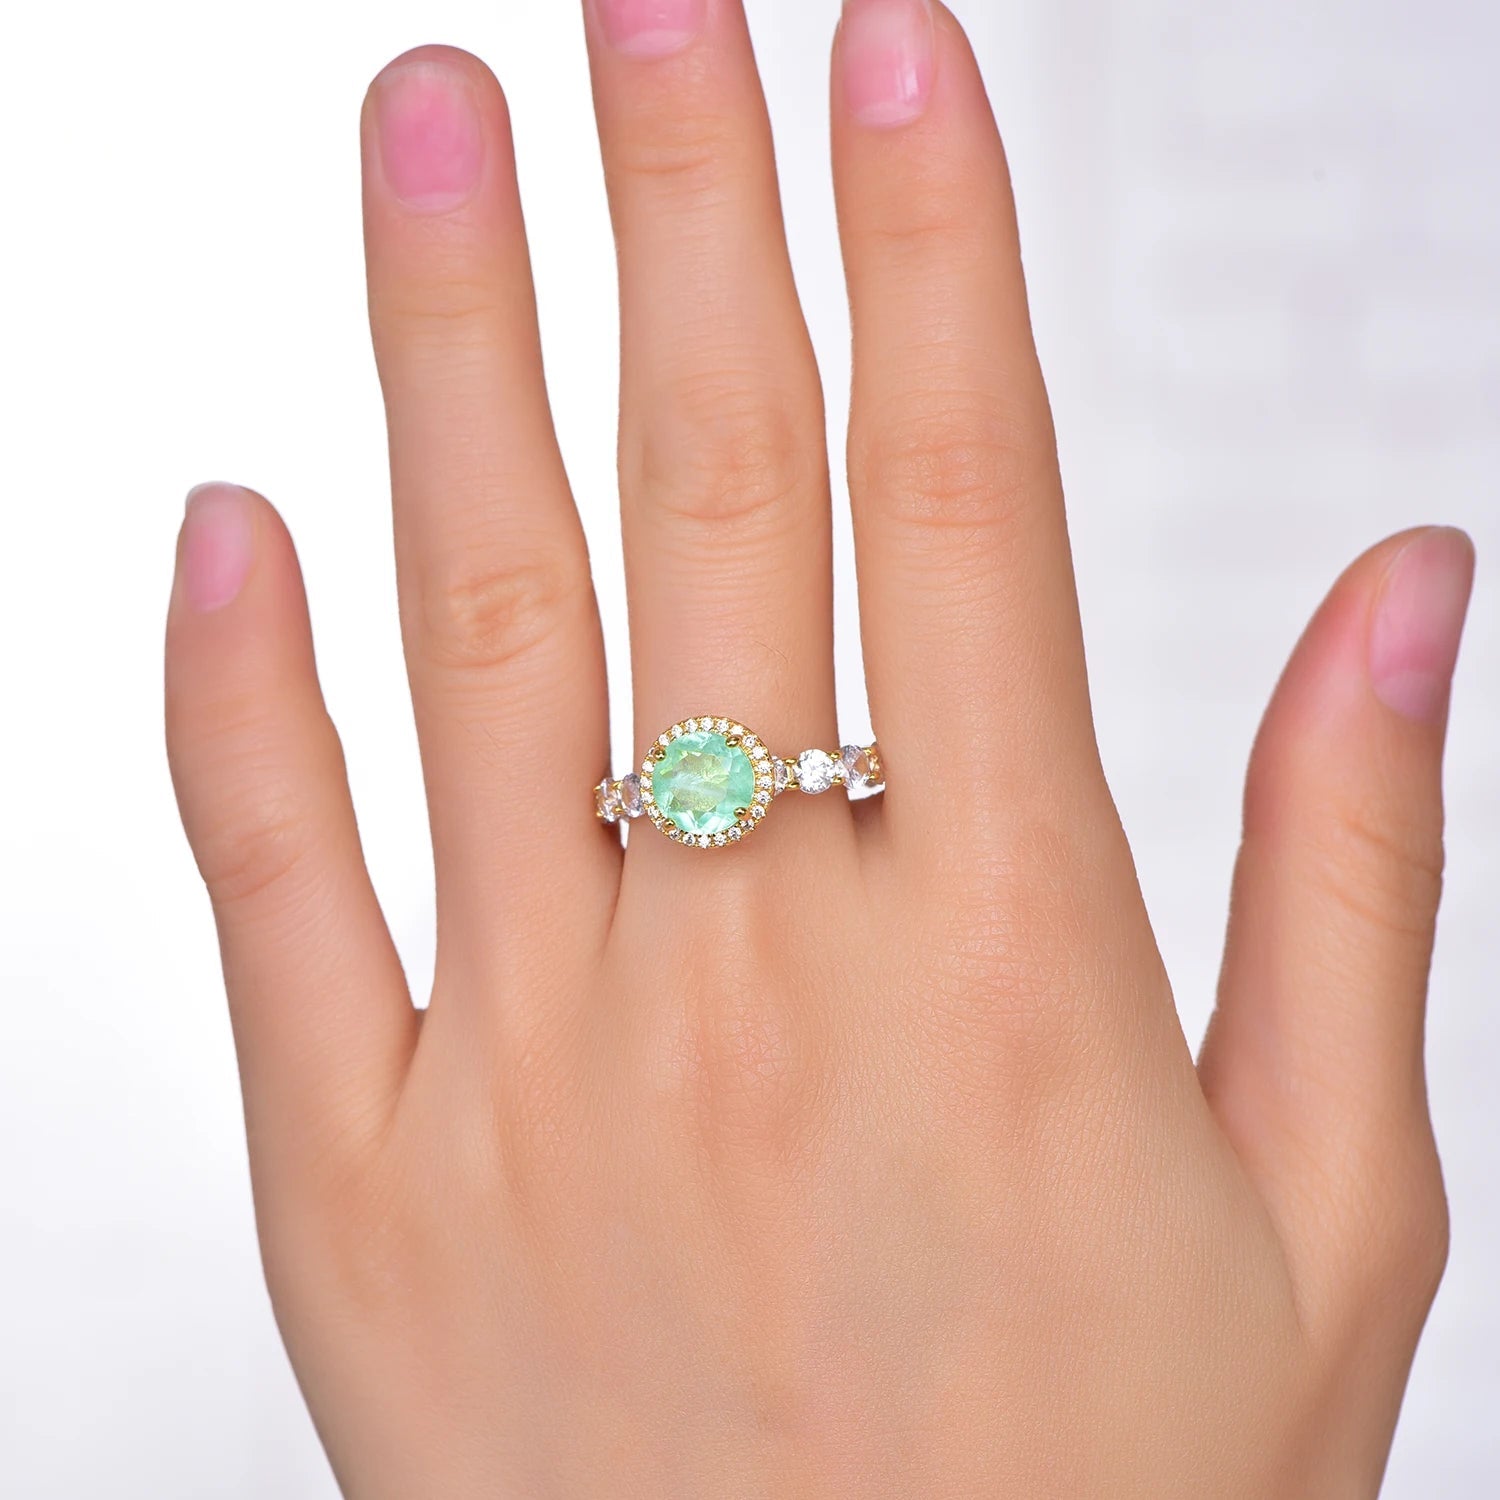 CBX18 Paraiba & 3A White Cubic Zirconia ring simple style 925 Sterling Silver size precious gem lady Kirin Jewelry